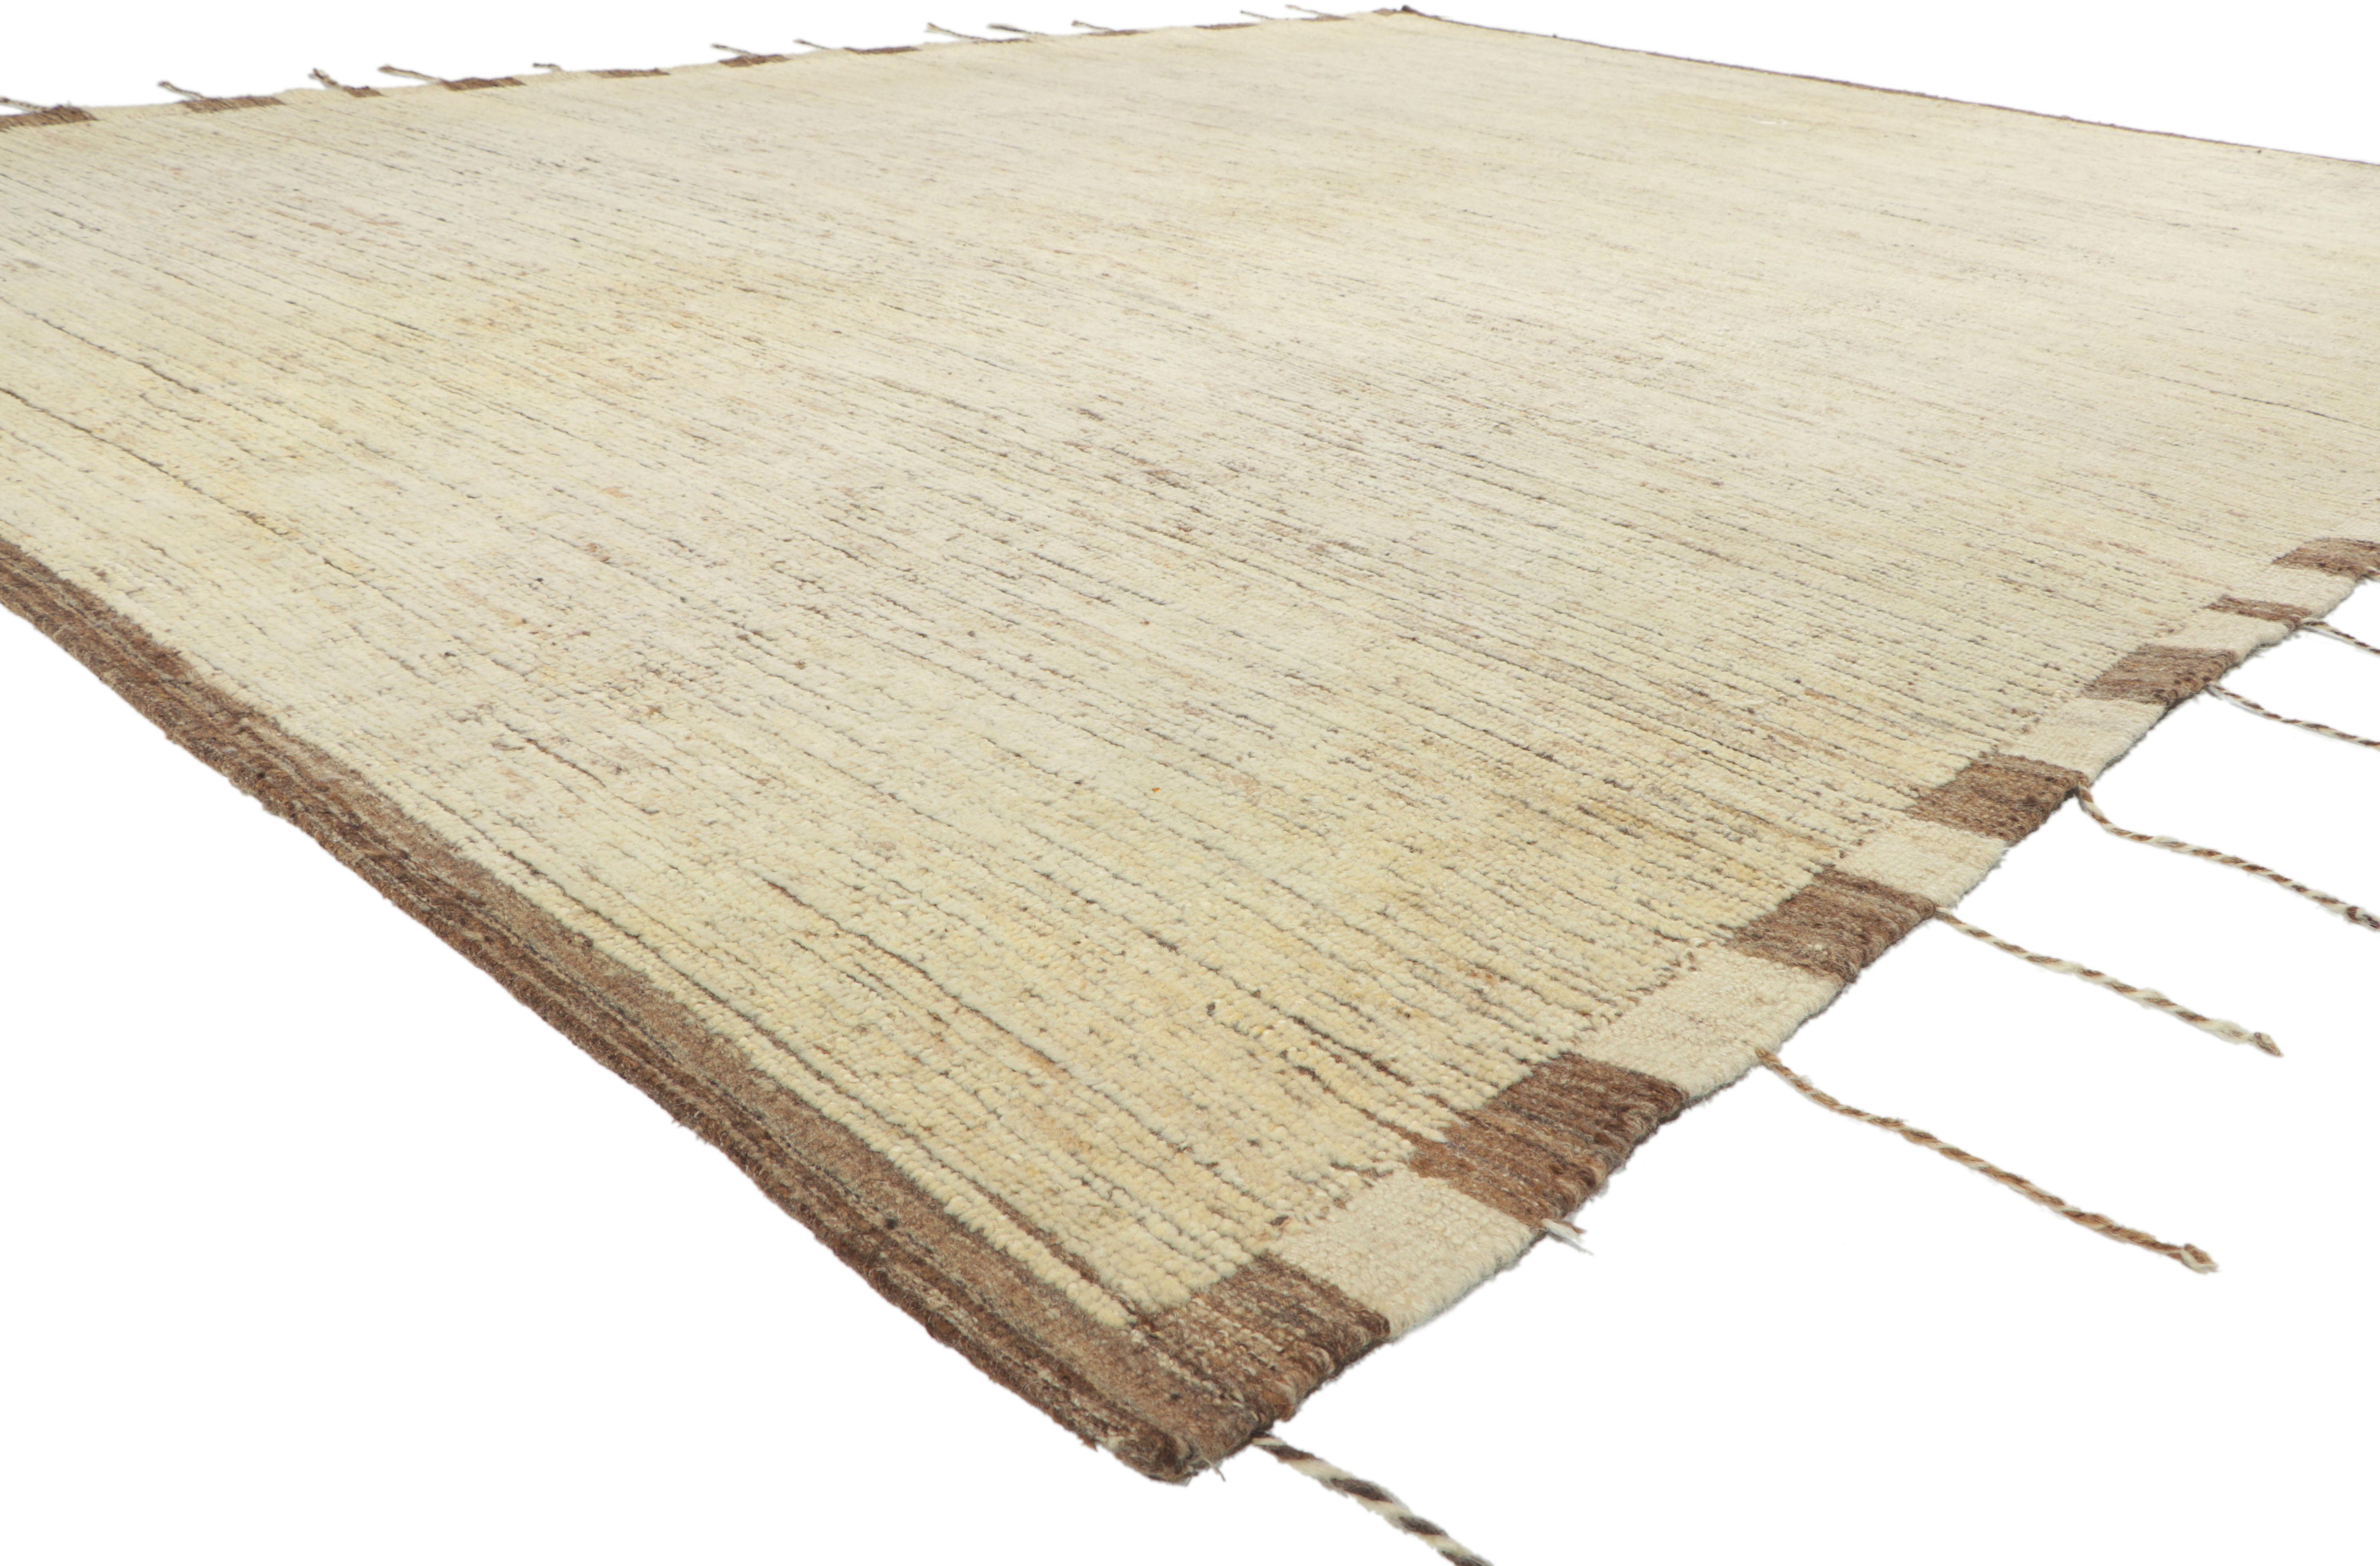 80809 Organic Modern Moroccan Rug, 10'02 x 13'09.
Subtle Shibui meets cozy contentment in this hand knotted wool organic modern Moroccan rug. Imbued with neutral hues, the coveted open field features a barely-there striped pattern composed of